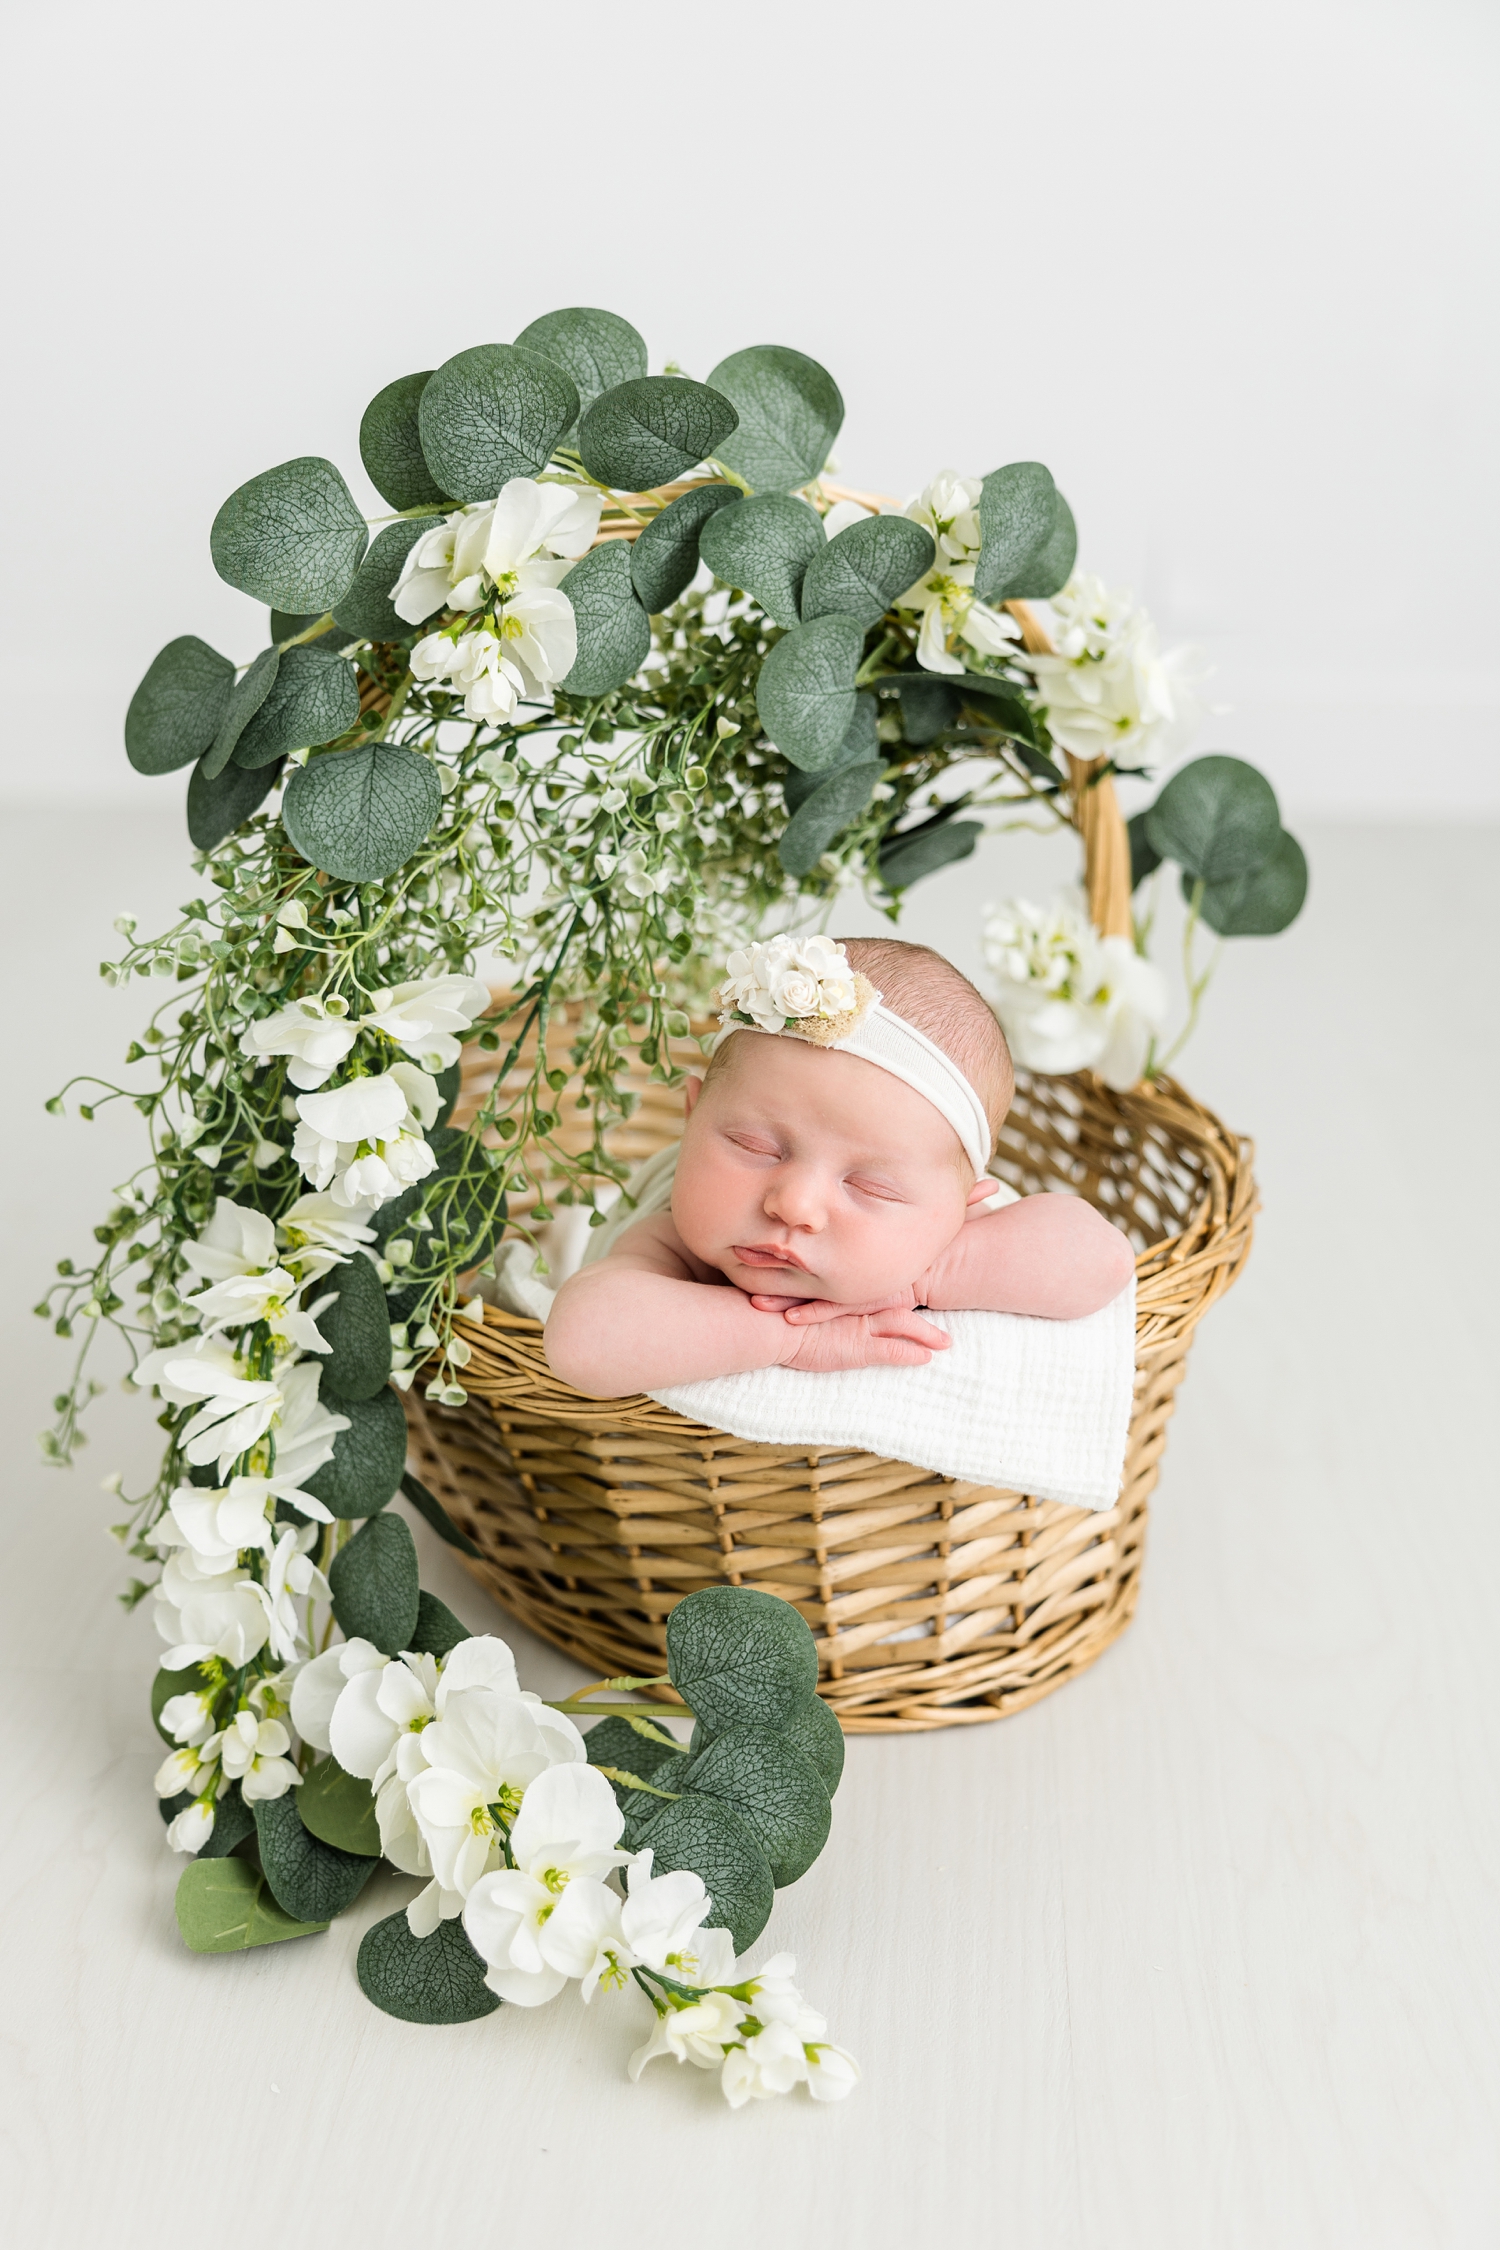 In an all white room, baby Lylah lays in a wicker basket with greenery and white flowers draped along the the handle | CB Studio